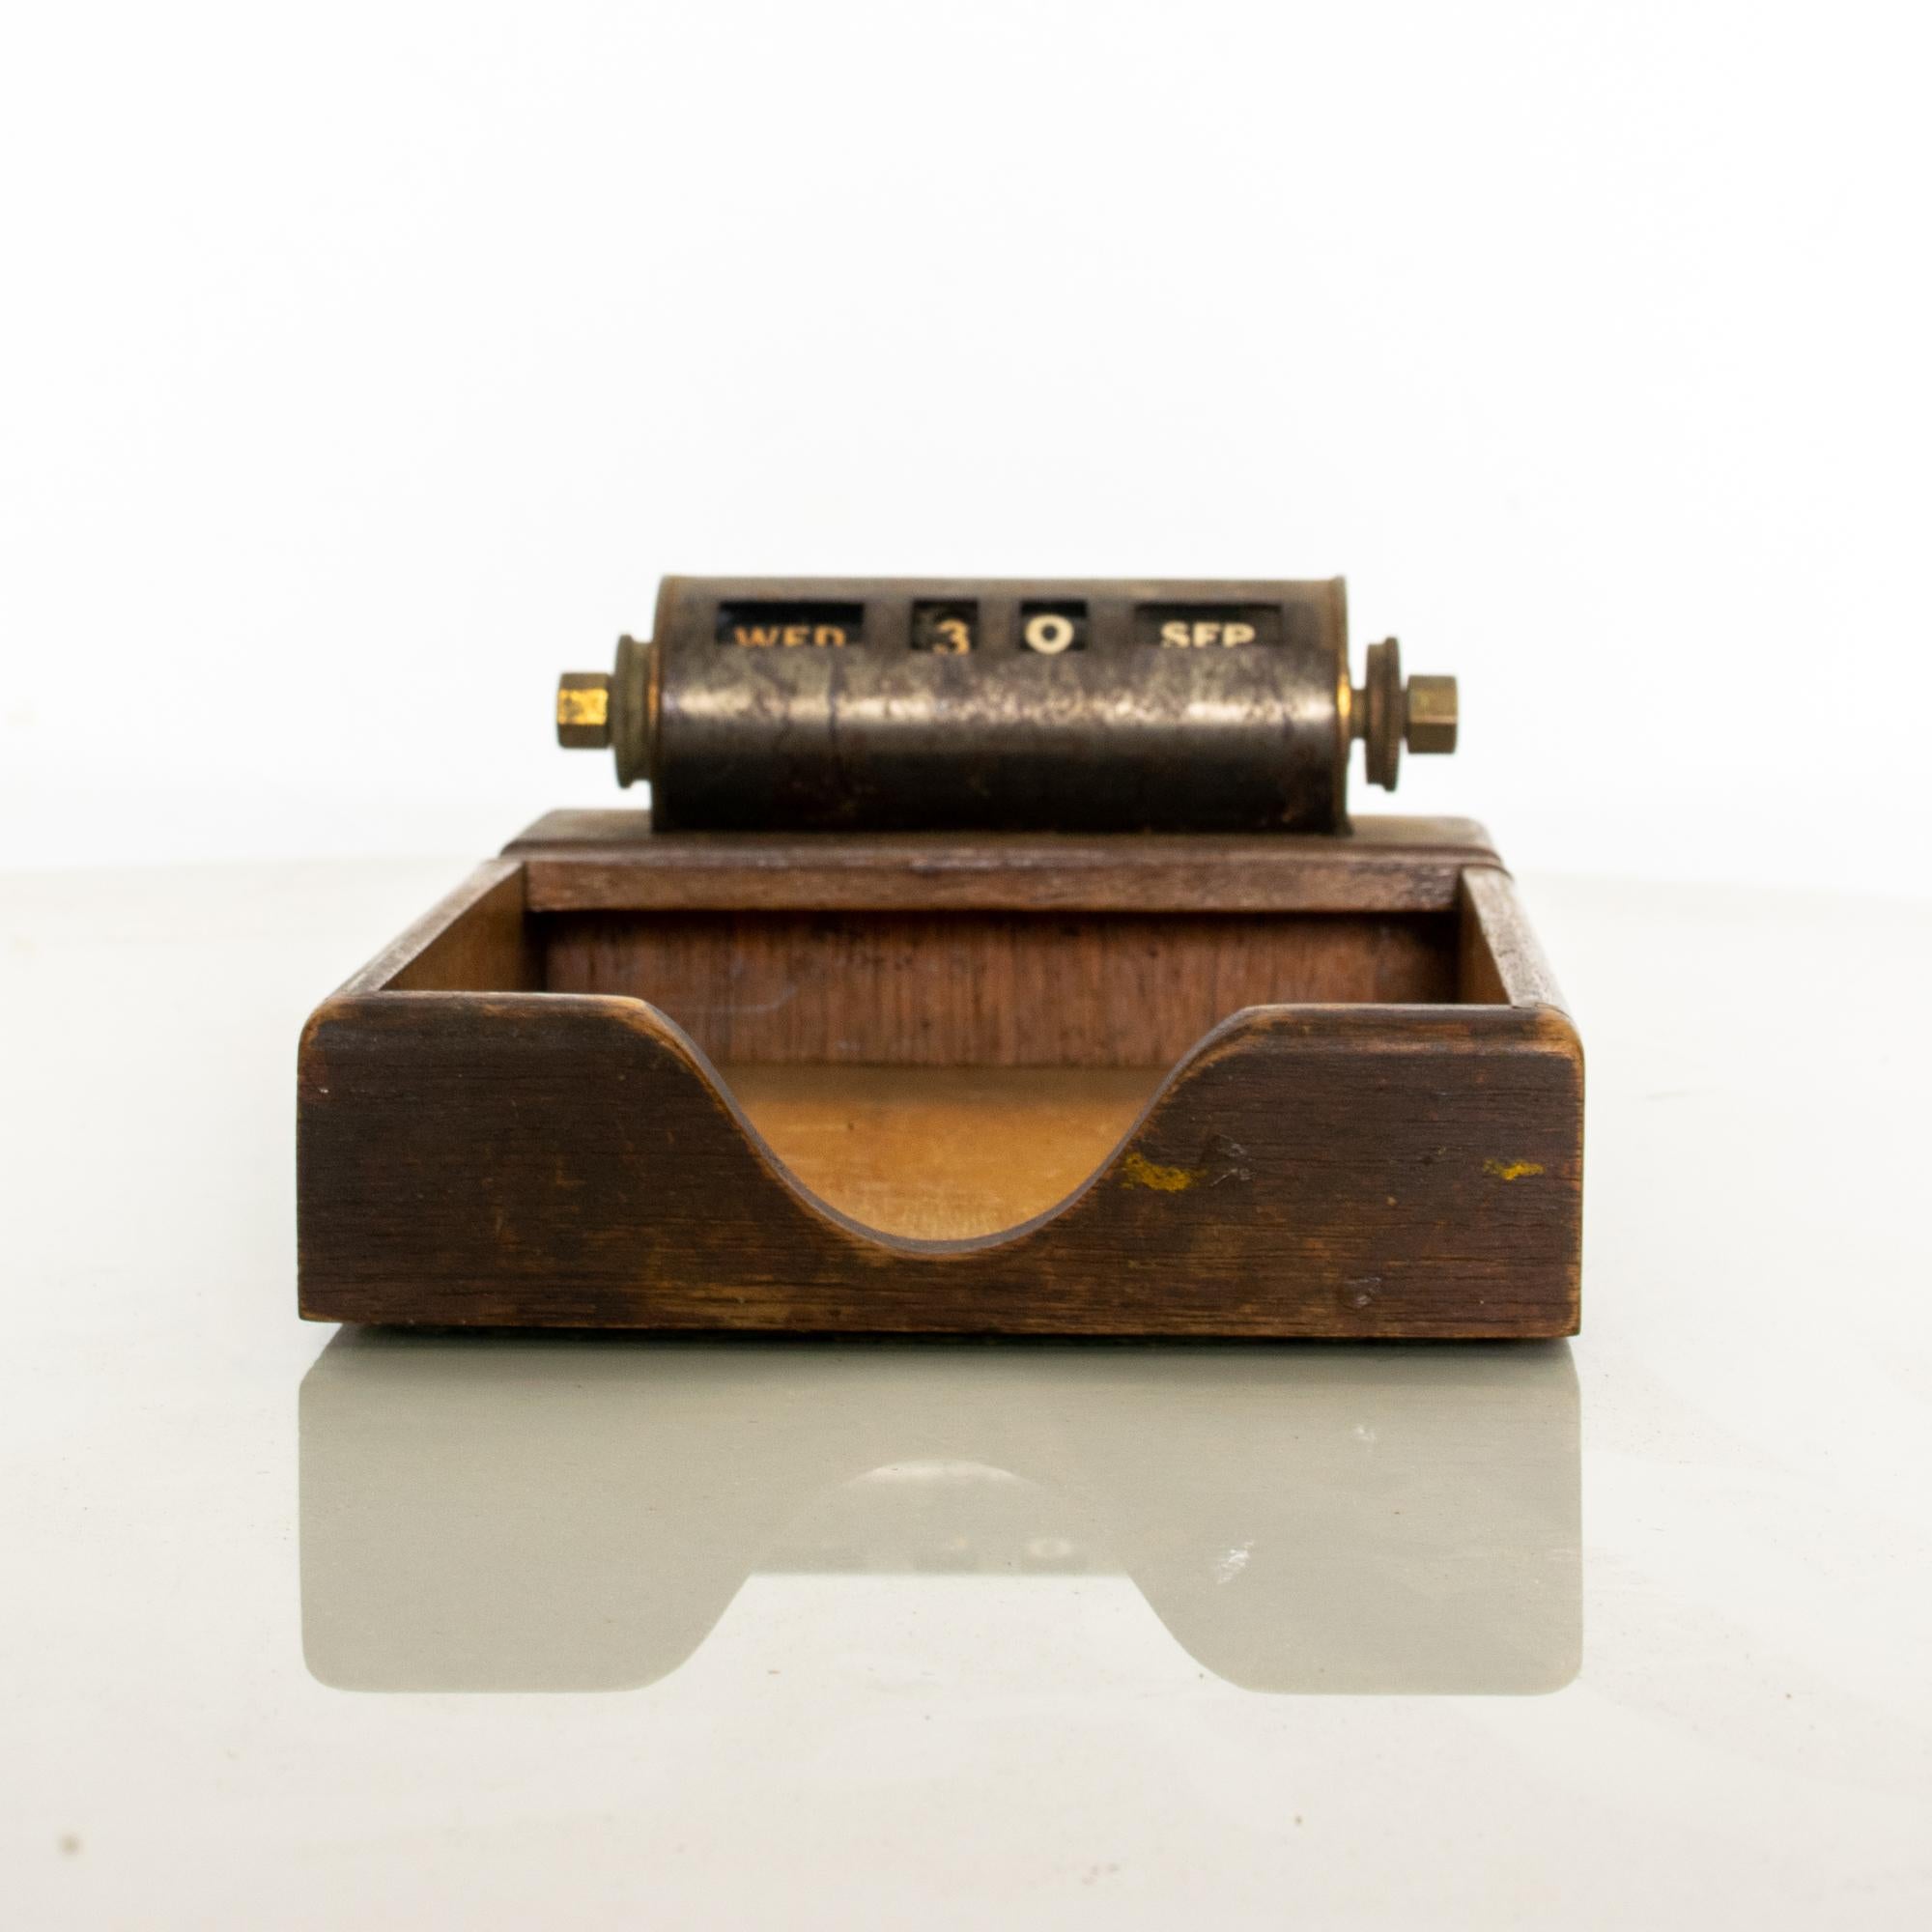 1950s Desk Calendar notepaper holder tray

Perpetual Calendar by Park Sherman Co 
Solid Walnut and Brass.
Springfield, IL 
4.75 x 7 D x 2.38H
Original Preowned Unrestored Vintage Condition. Delightful distress.
Review all images.

